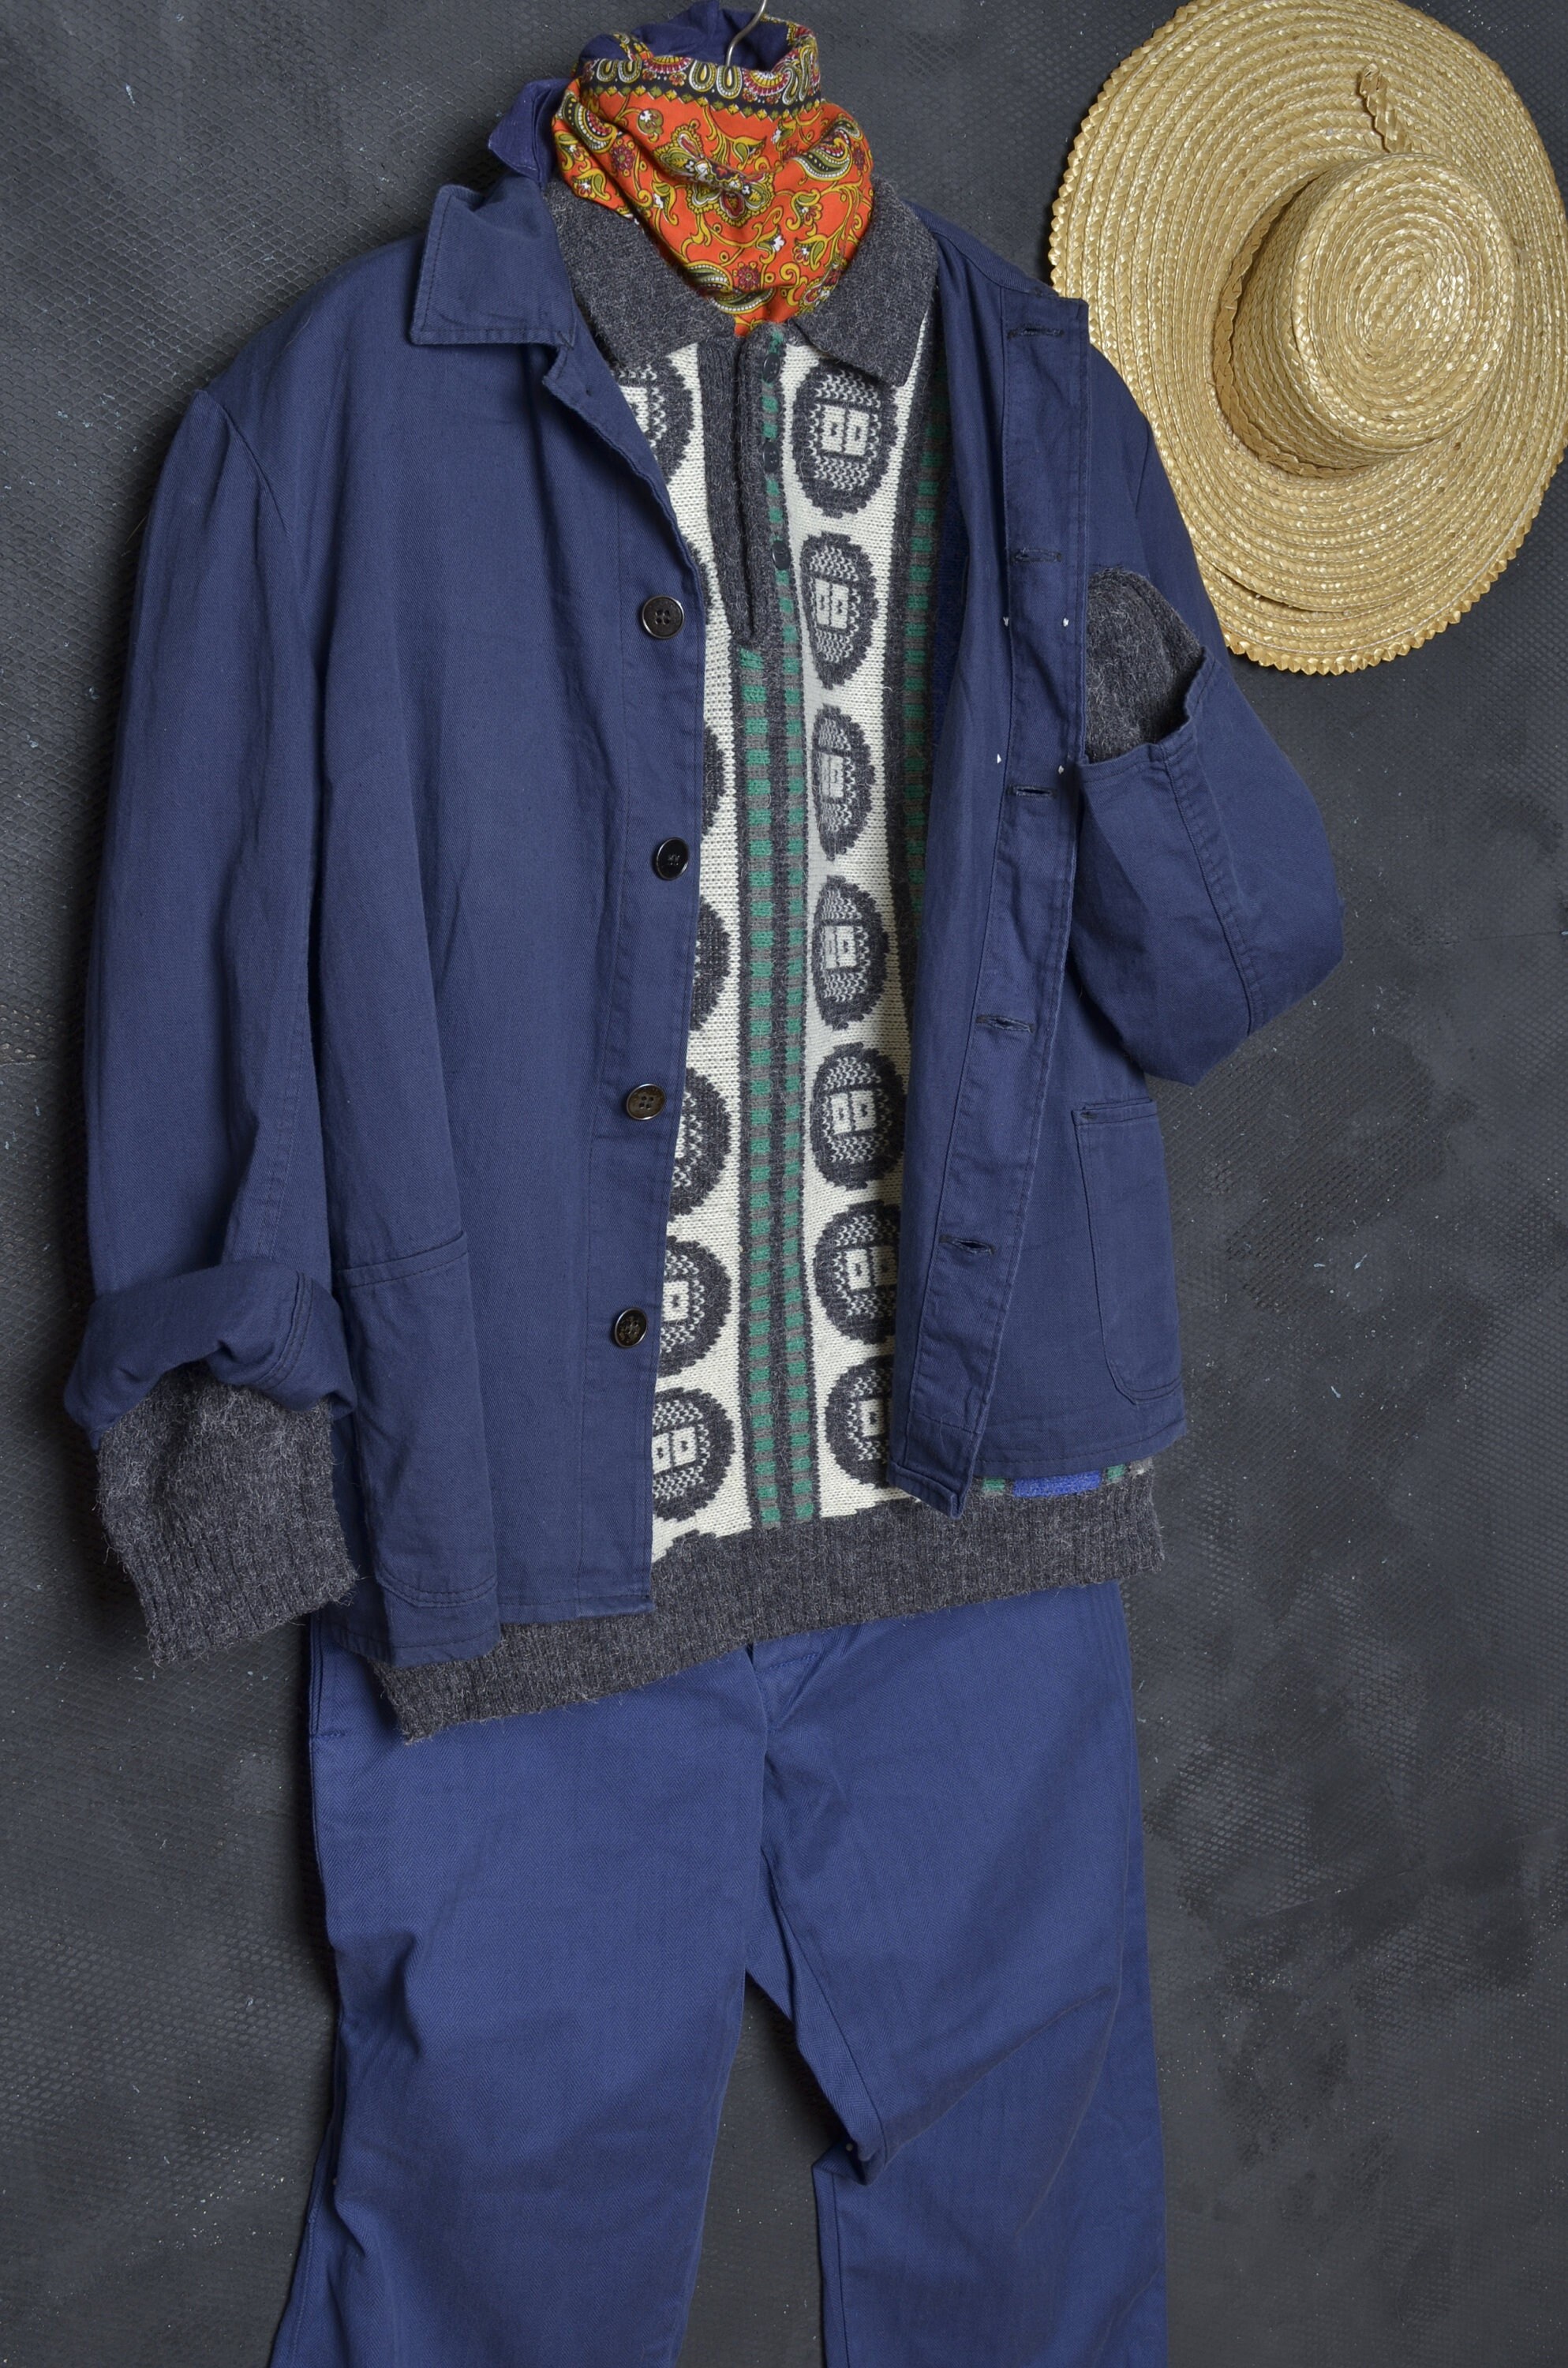 WORKWEAR OVERSHIRT IN BOUQUET CAMEO PRINTED COTTON